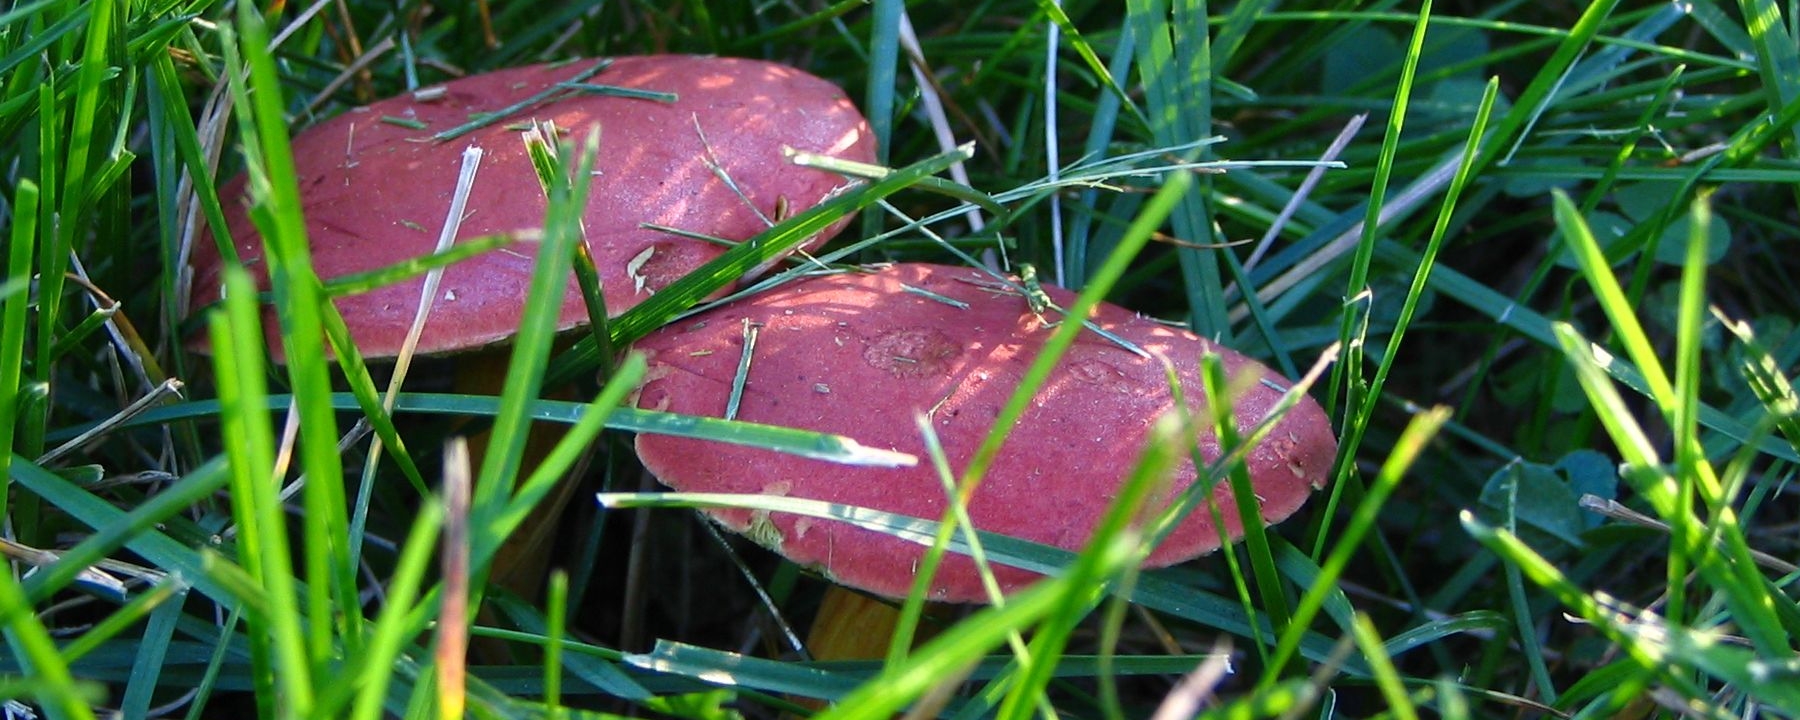 A pair of toadstoals in the grass